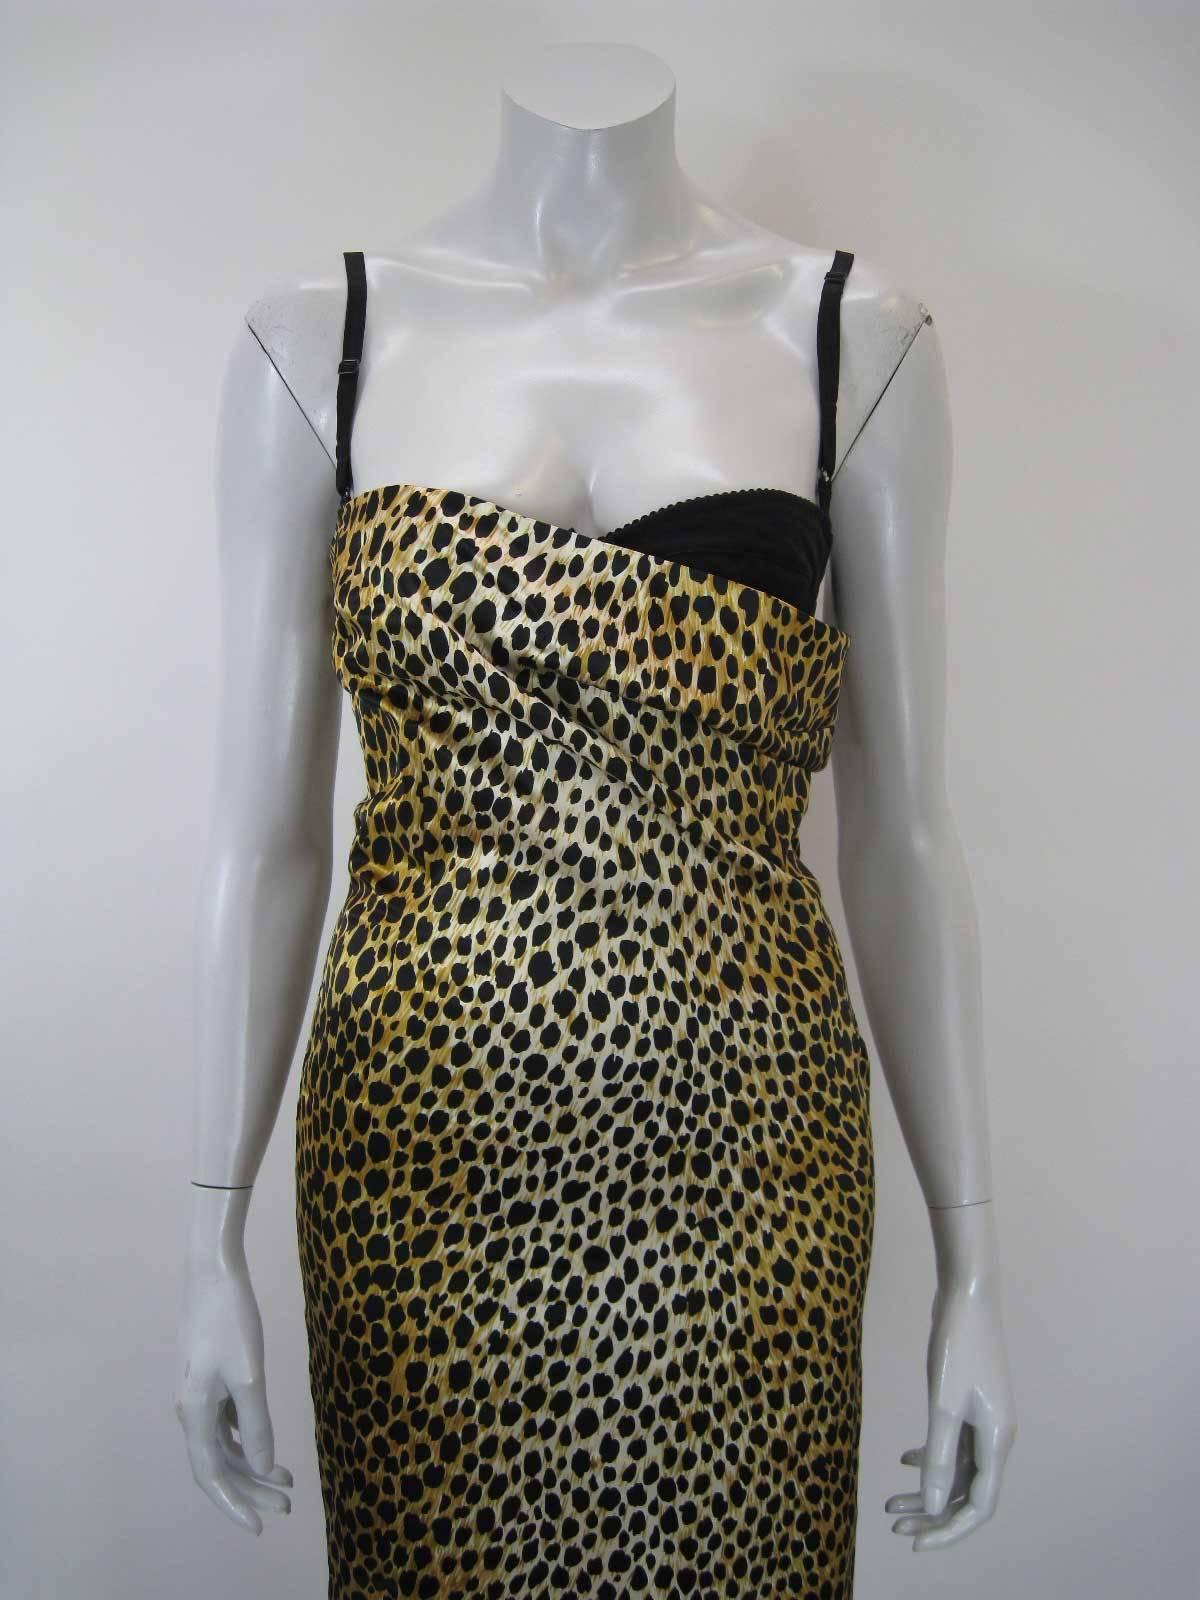 Sexy Dolce & Gabbana bodycon cocktail dress.

Peek-a-boo underwire bra top with adjustable straps.

Very fitted stretchy fabric.

Back zipper. 

Fabric is silk/nylon/elastane.

Tagged size 38.

Lined,

This is in excellent pre-owned condition